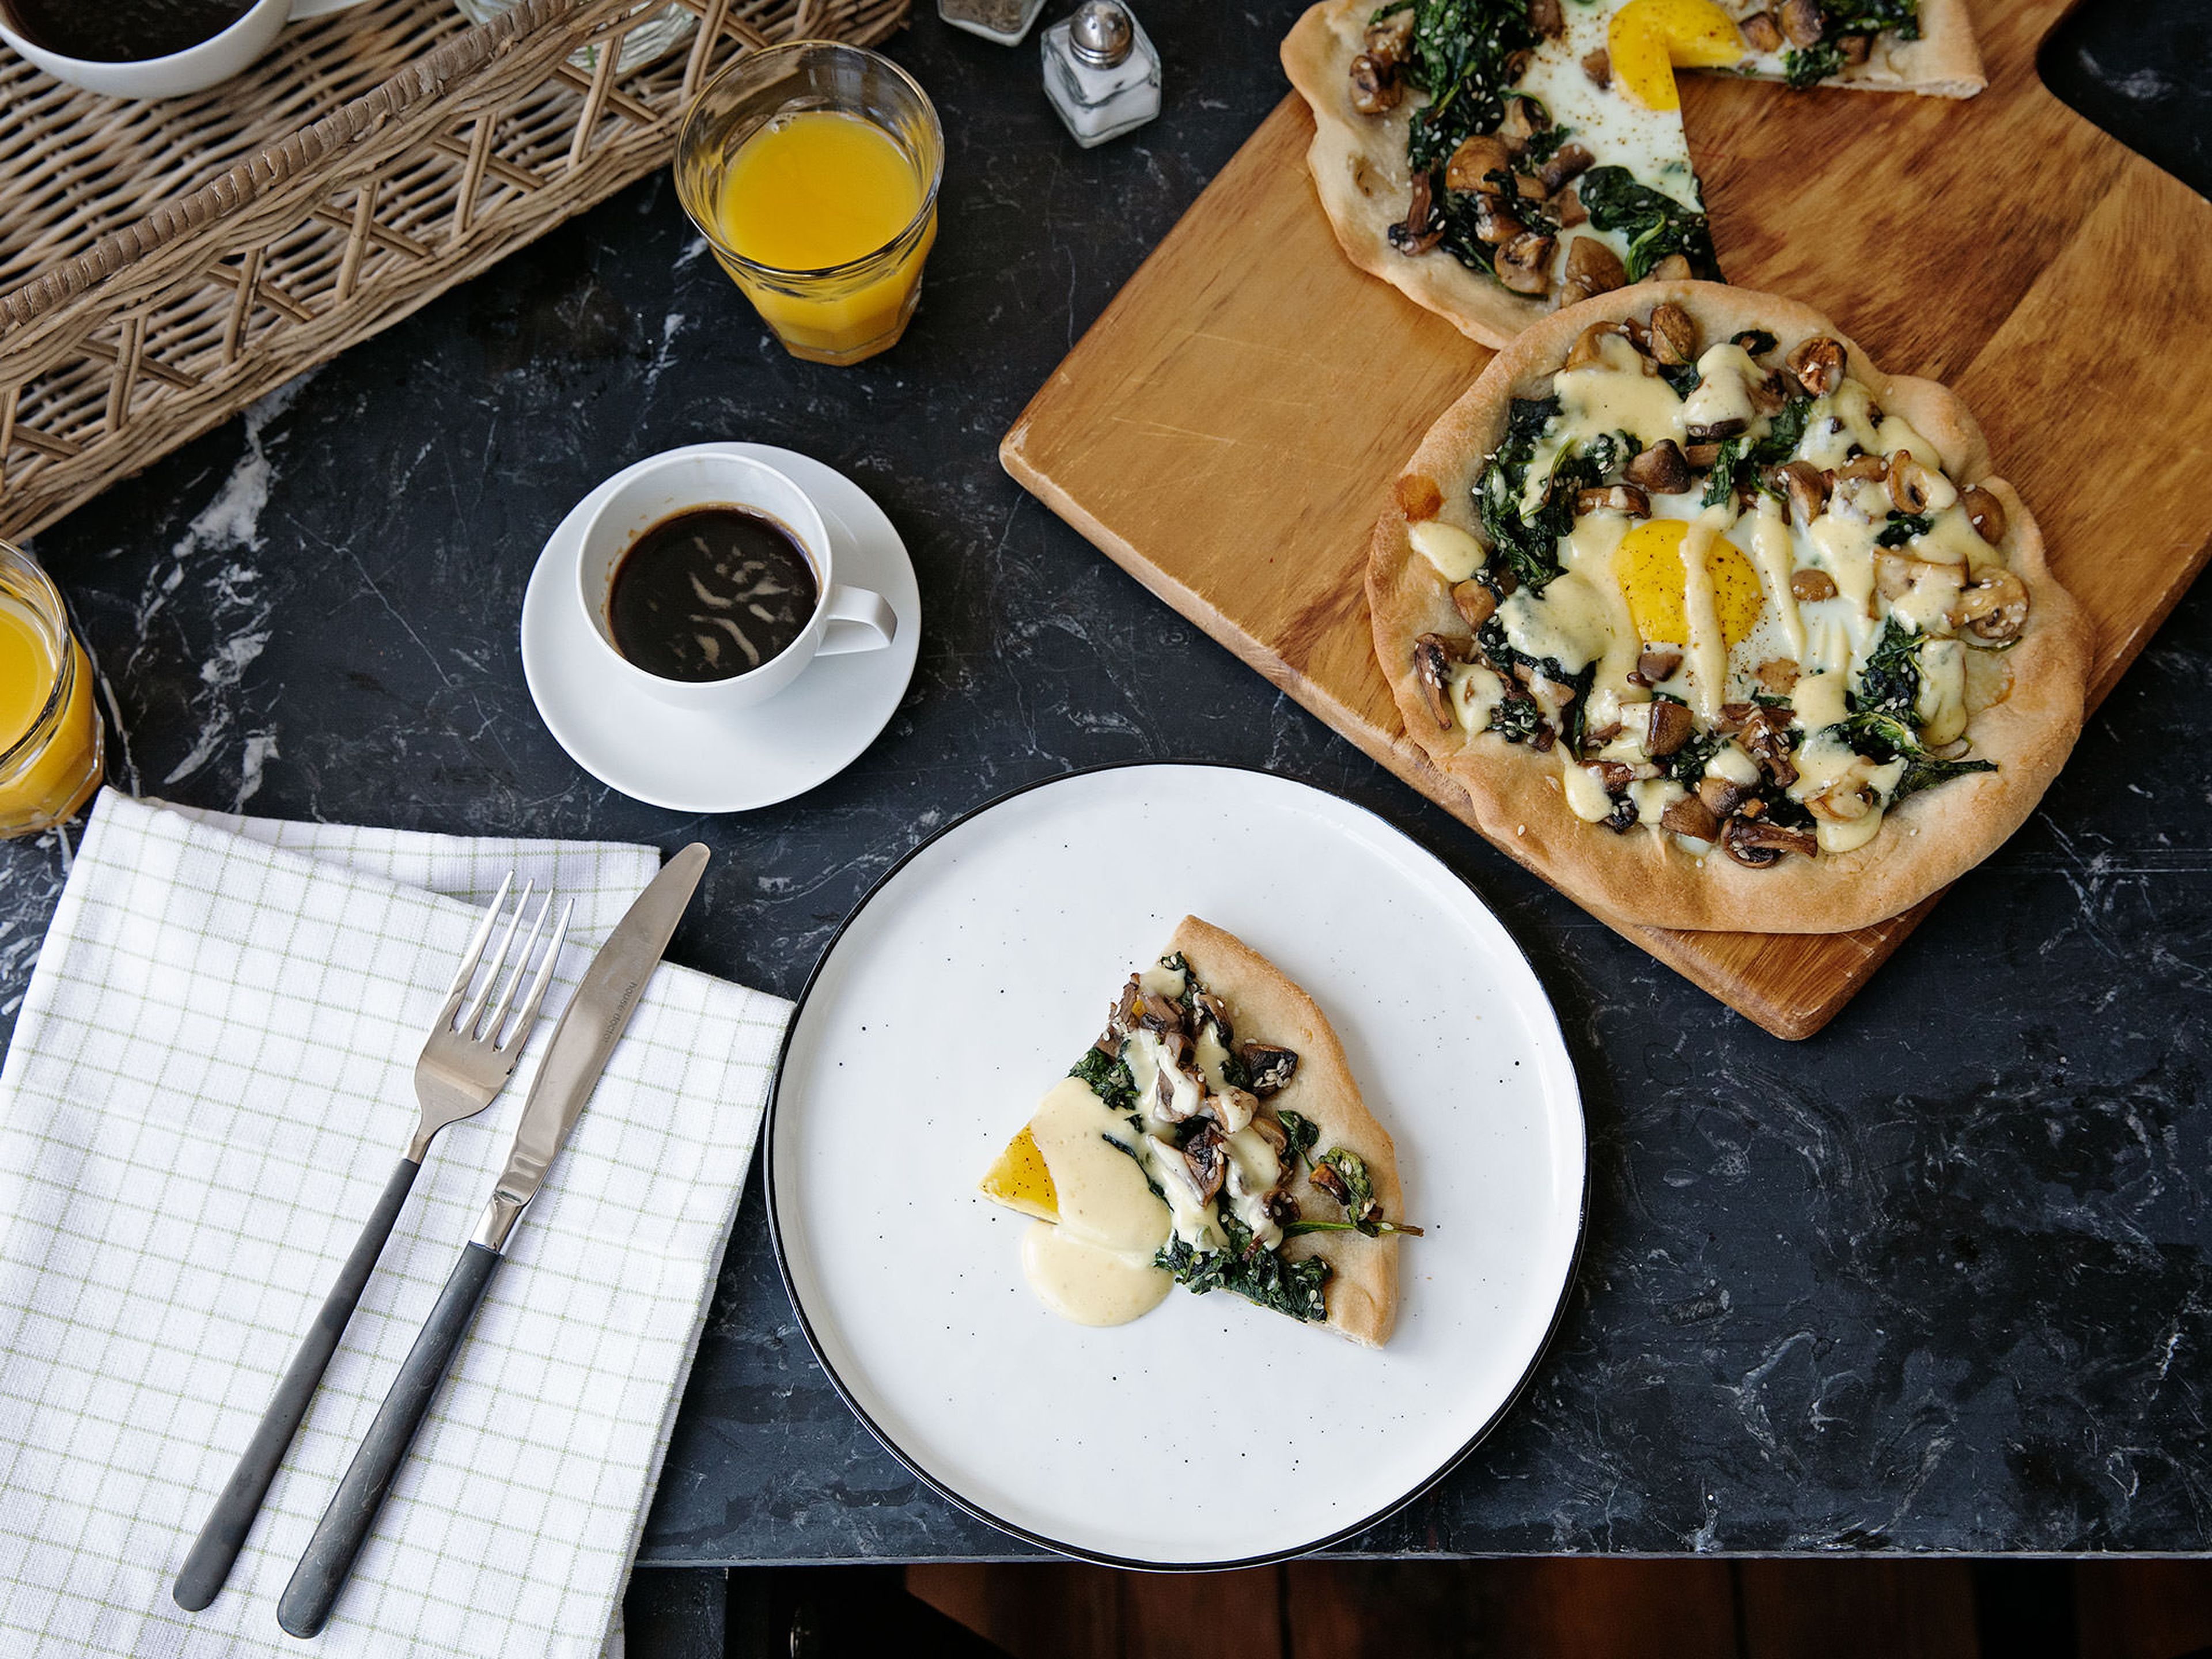 Breakfast pizza with mushrooms, spinach, and egg